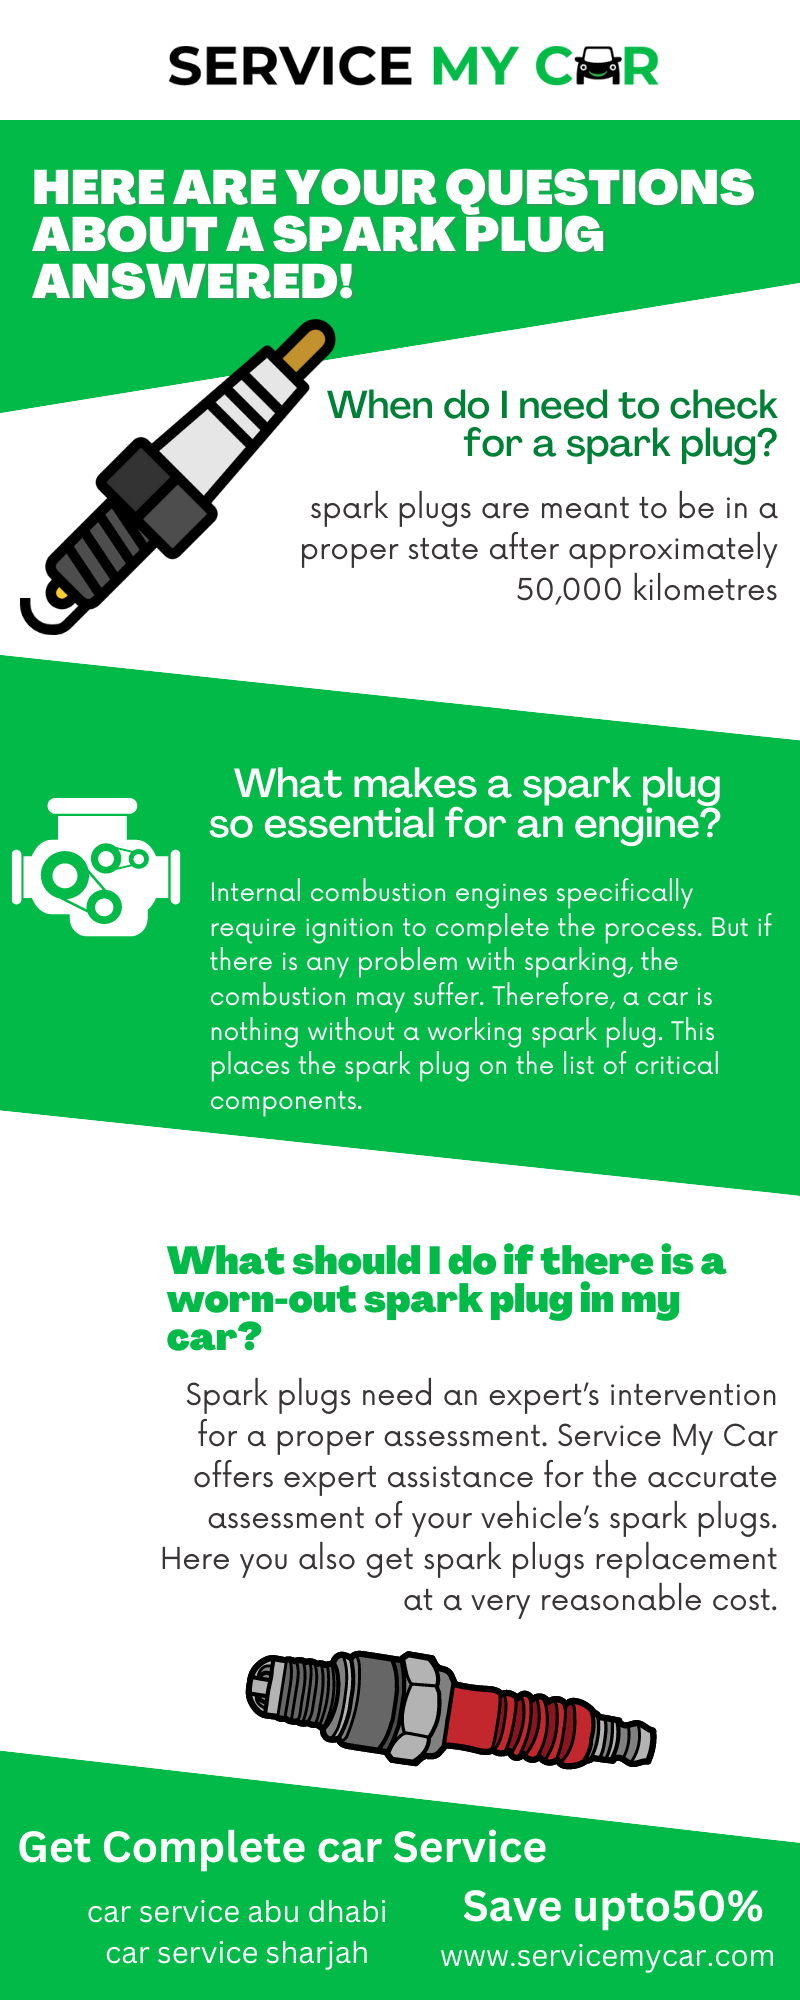 Here are your questions about a spark plug answered!